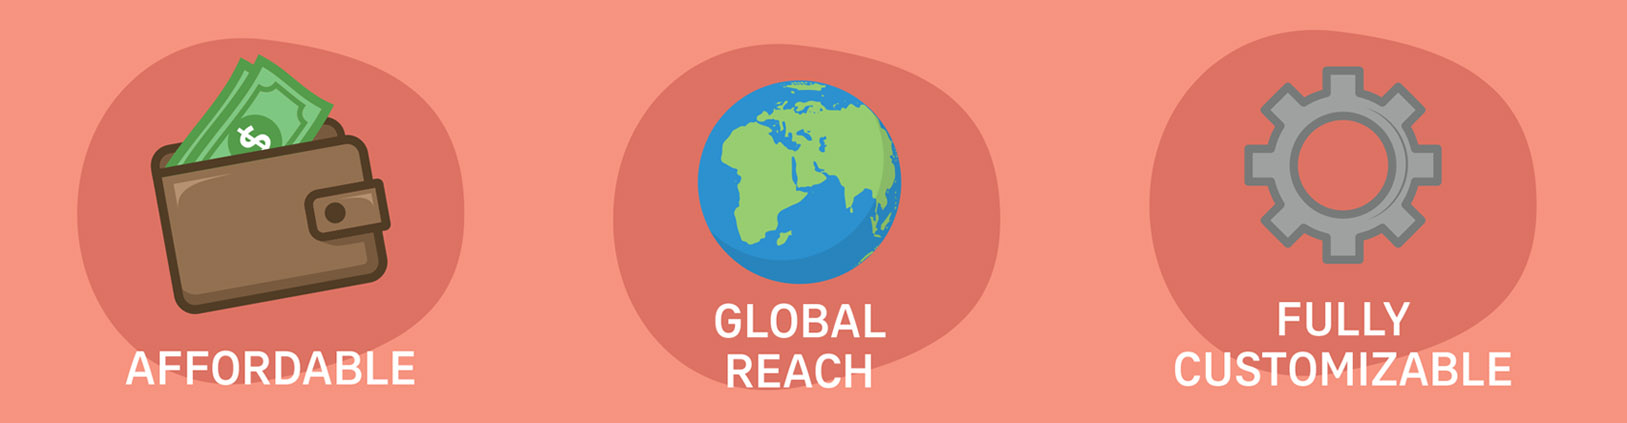 affordable, global reach, fully customizable